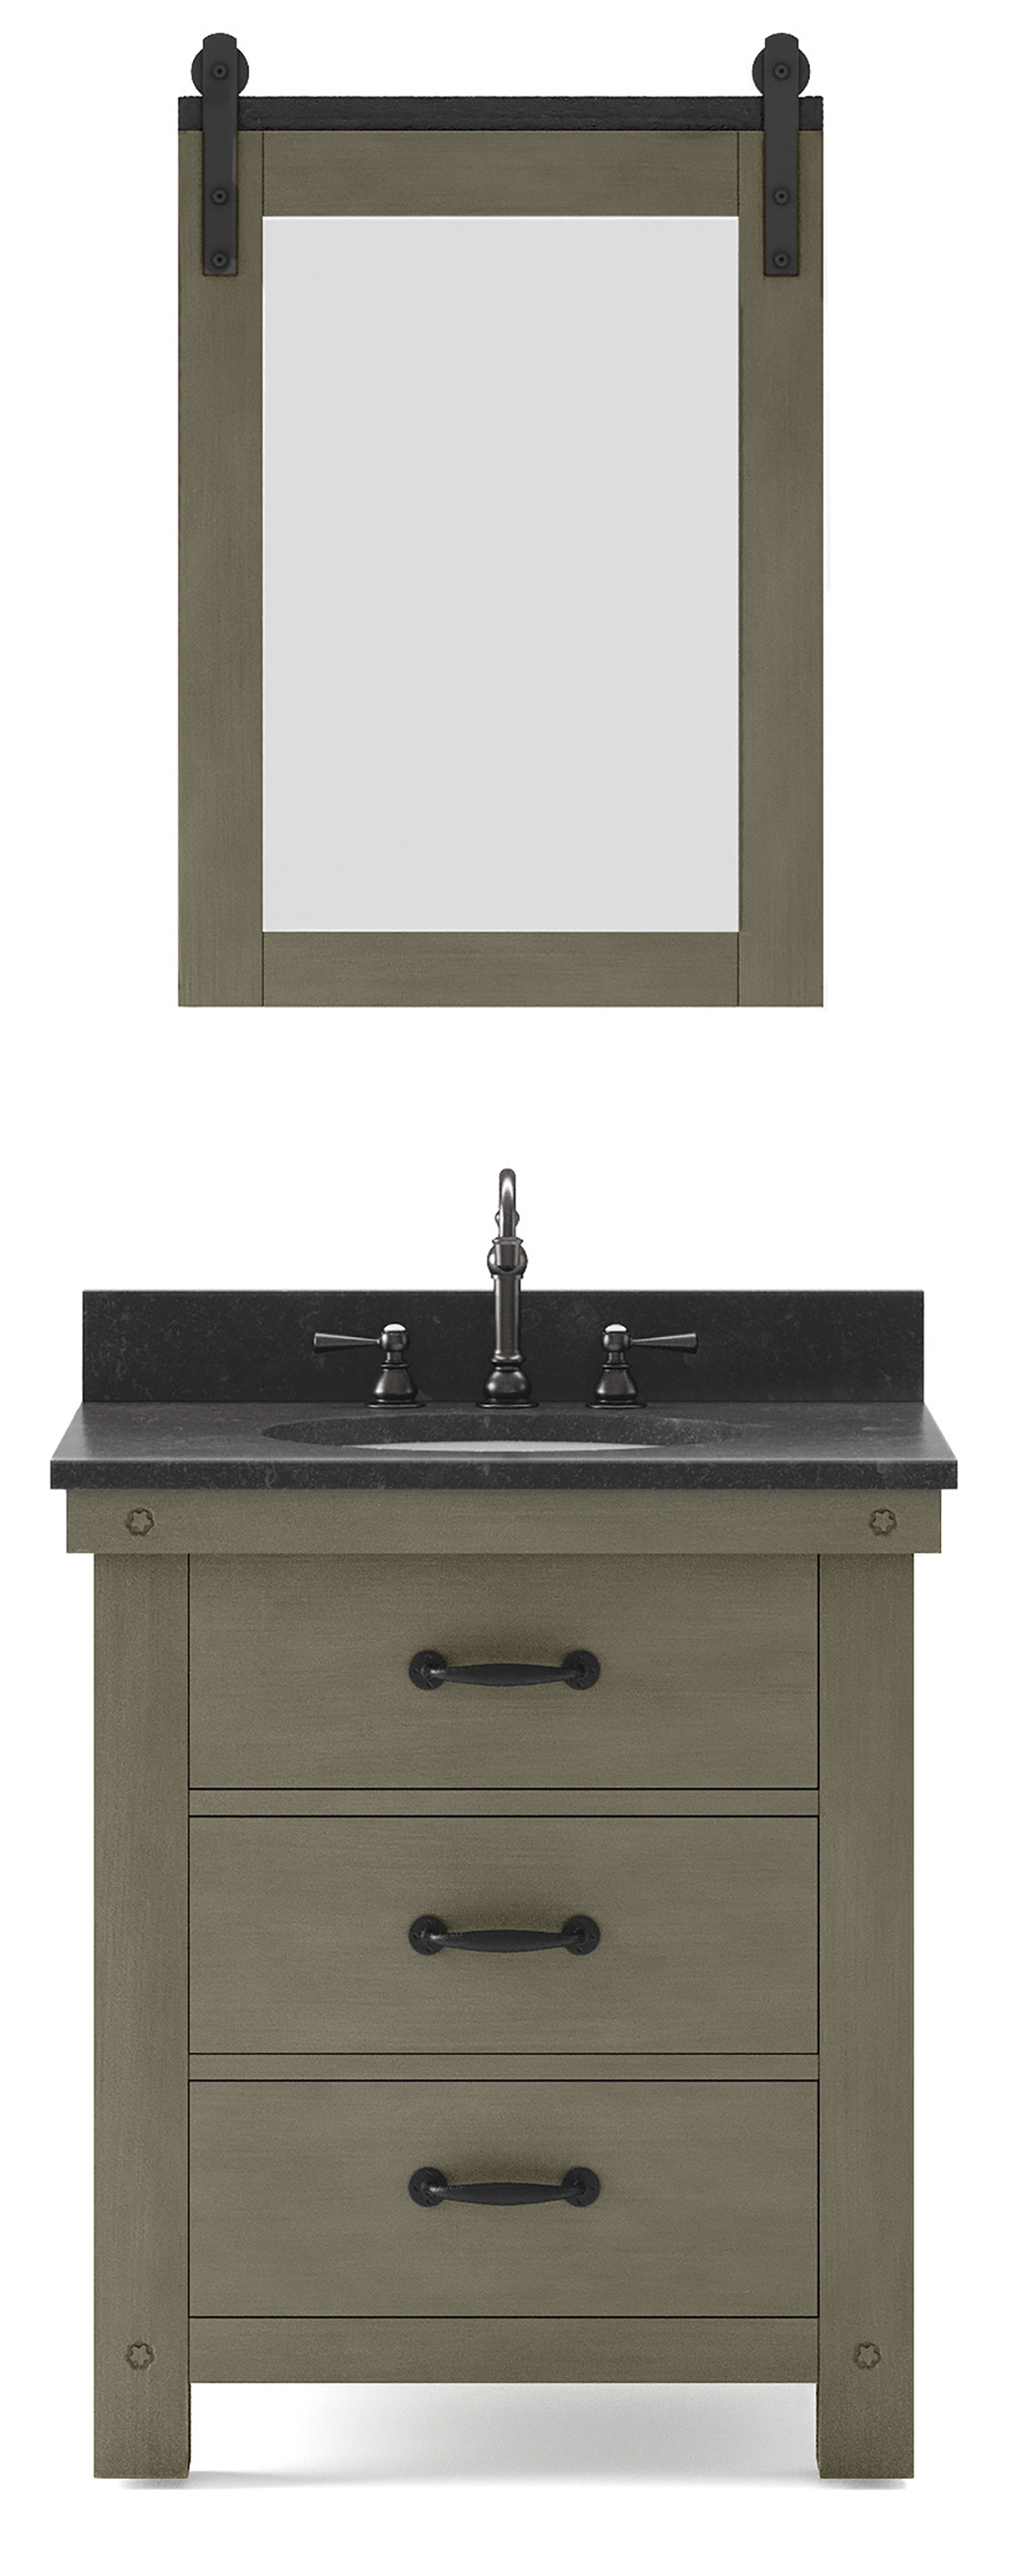 30" Single Sink Blue Limestone Countertop Vanity in Grizzle Gray and Mirror with Faucet Option